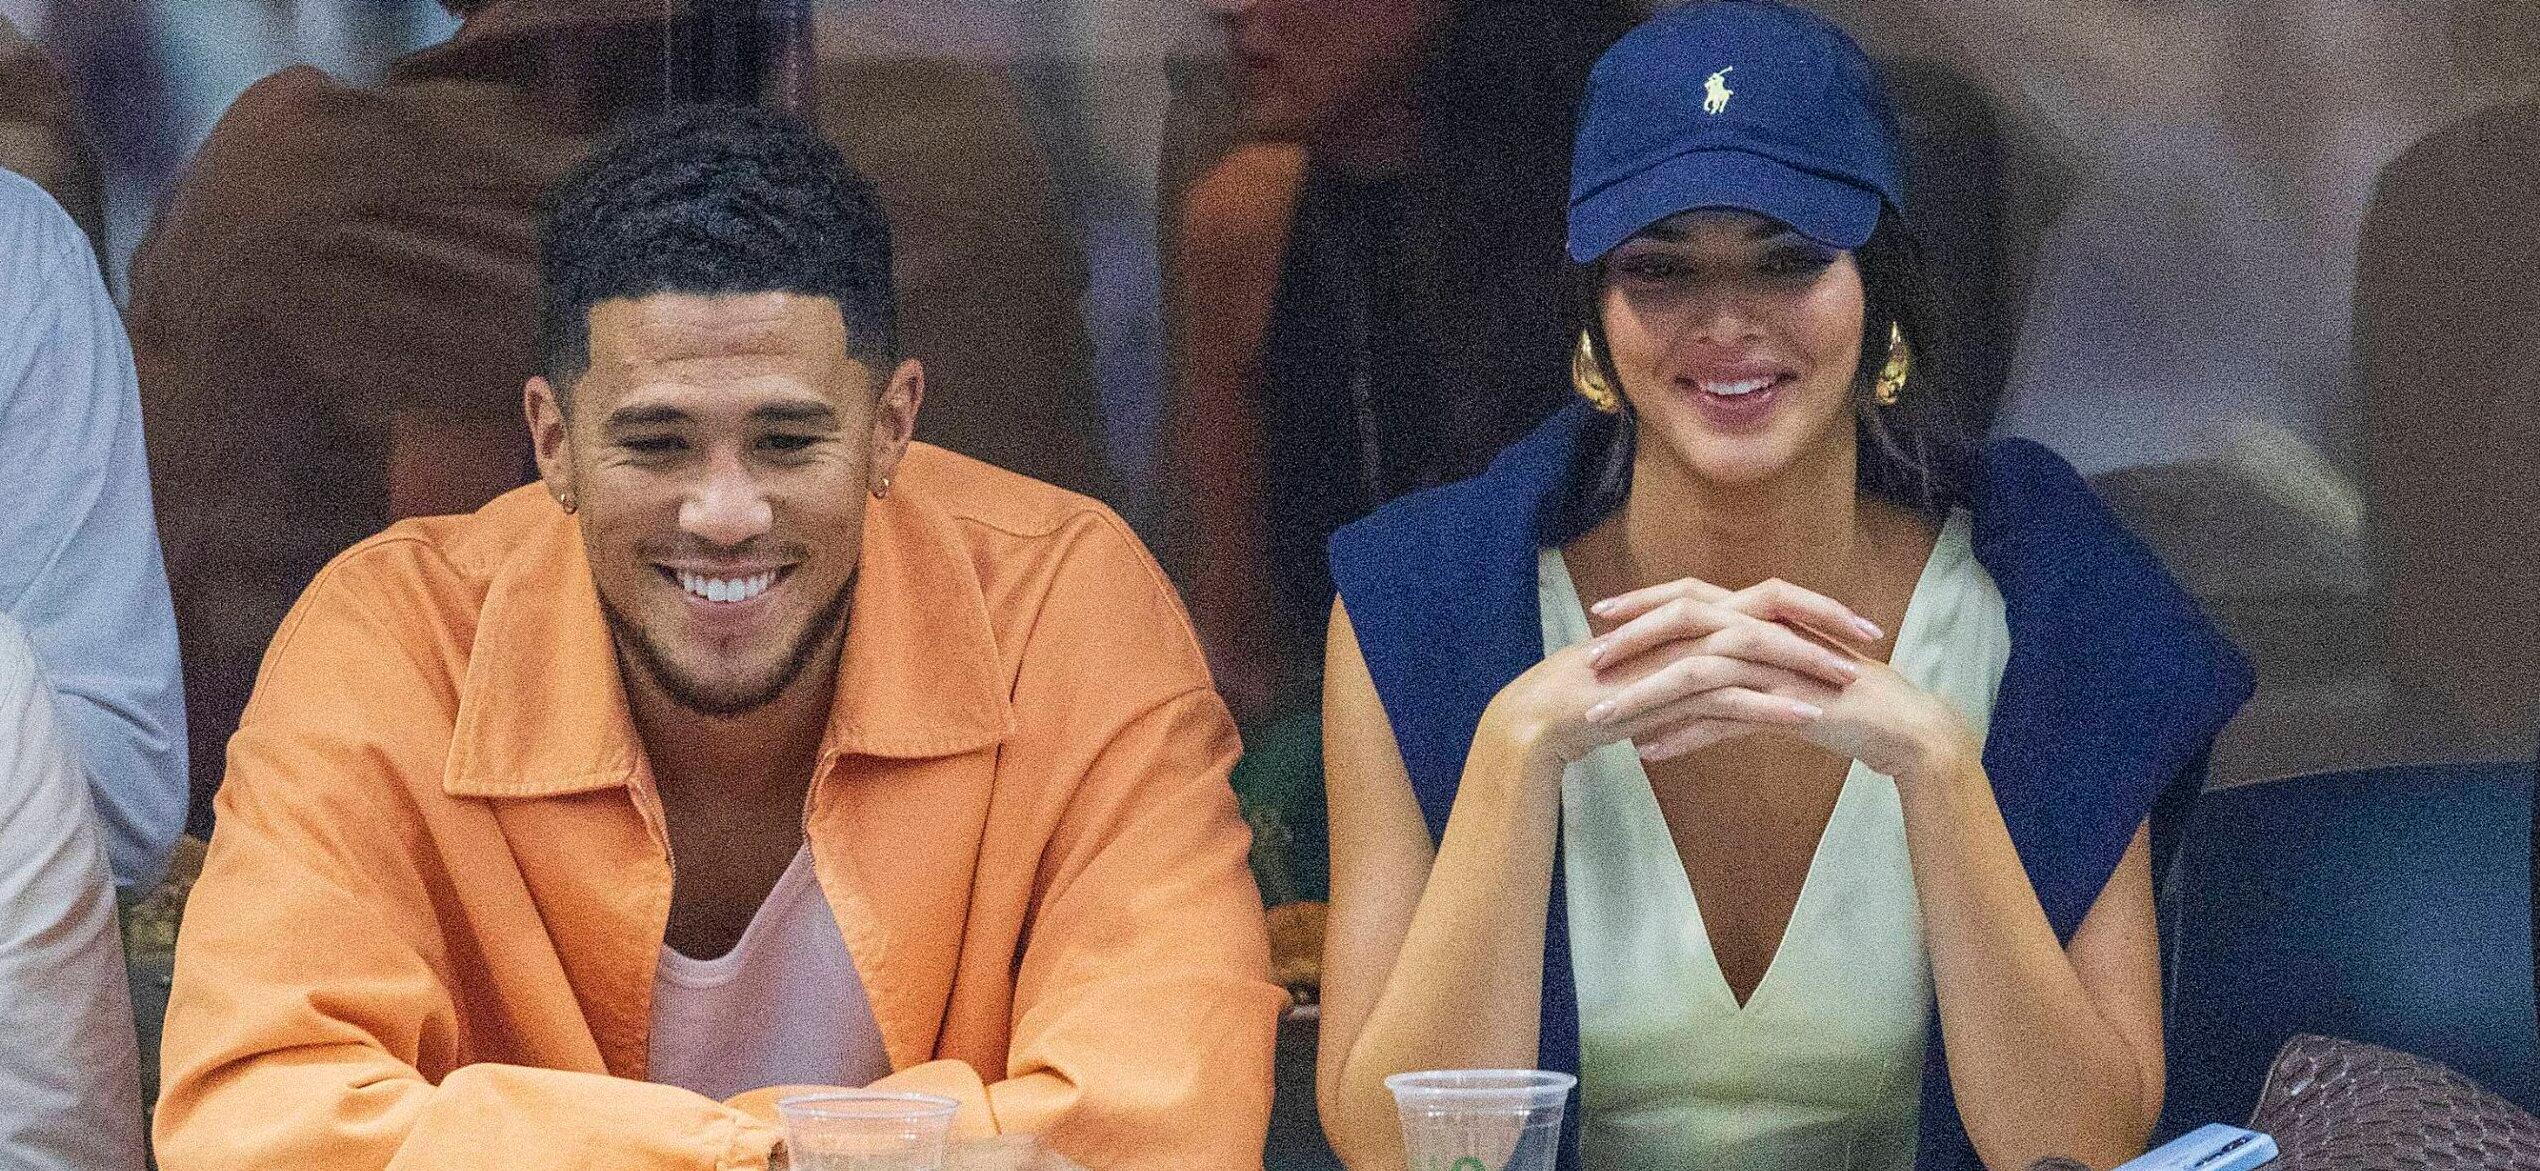 Kendall Jenner Hung With Ex Devin Booker At Super Bowl Suite, Not Bad Bunny